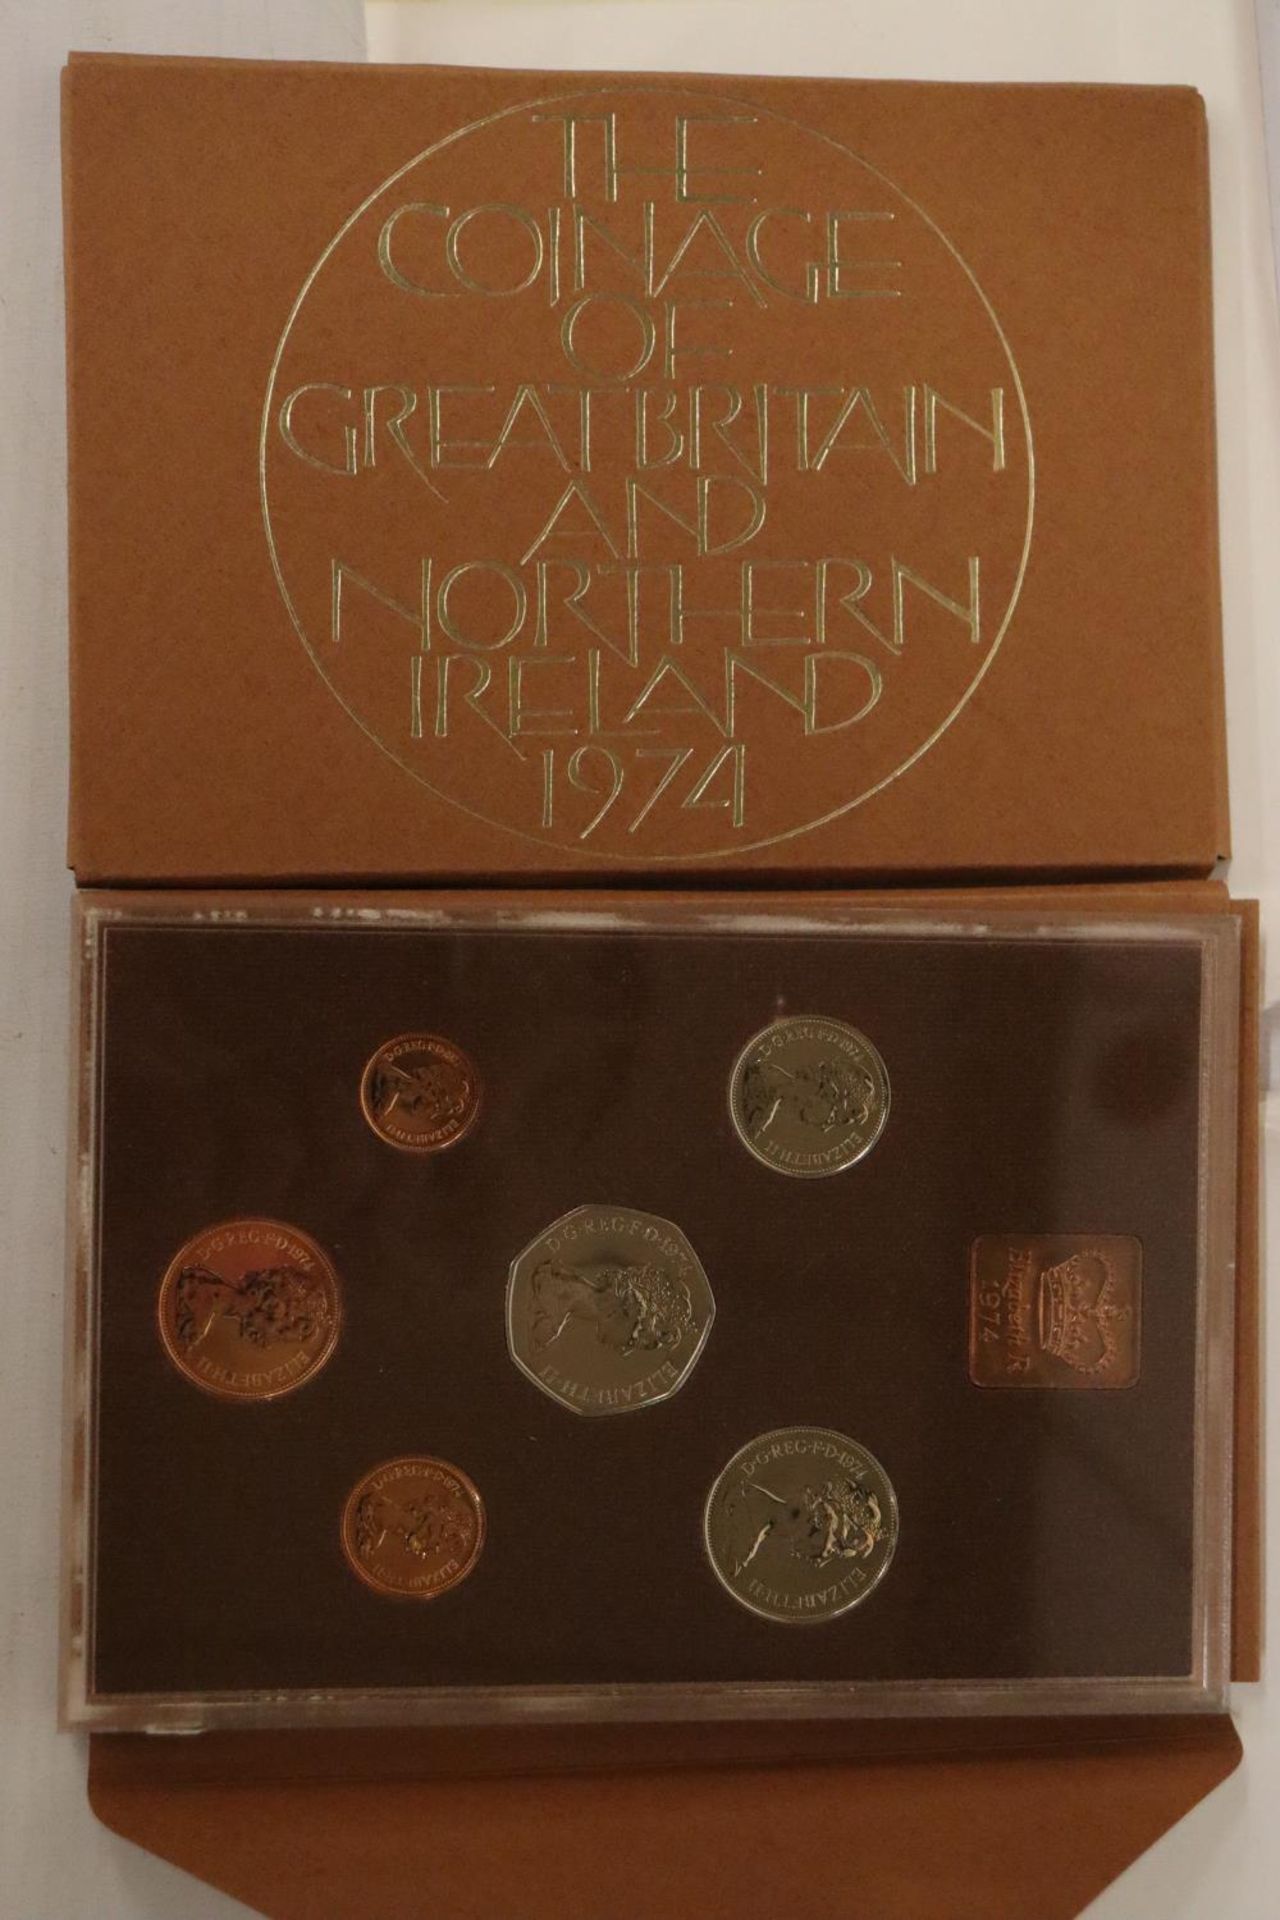 UK & NI , 2 X 1972, 2 X’73, 2 X ’74 AND 2 X ’75 YEAR PACKS OF COINS CONTAINED IN ENVELOPE - Bild 3 aus 5